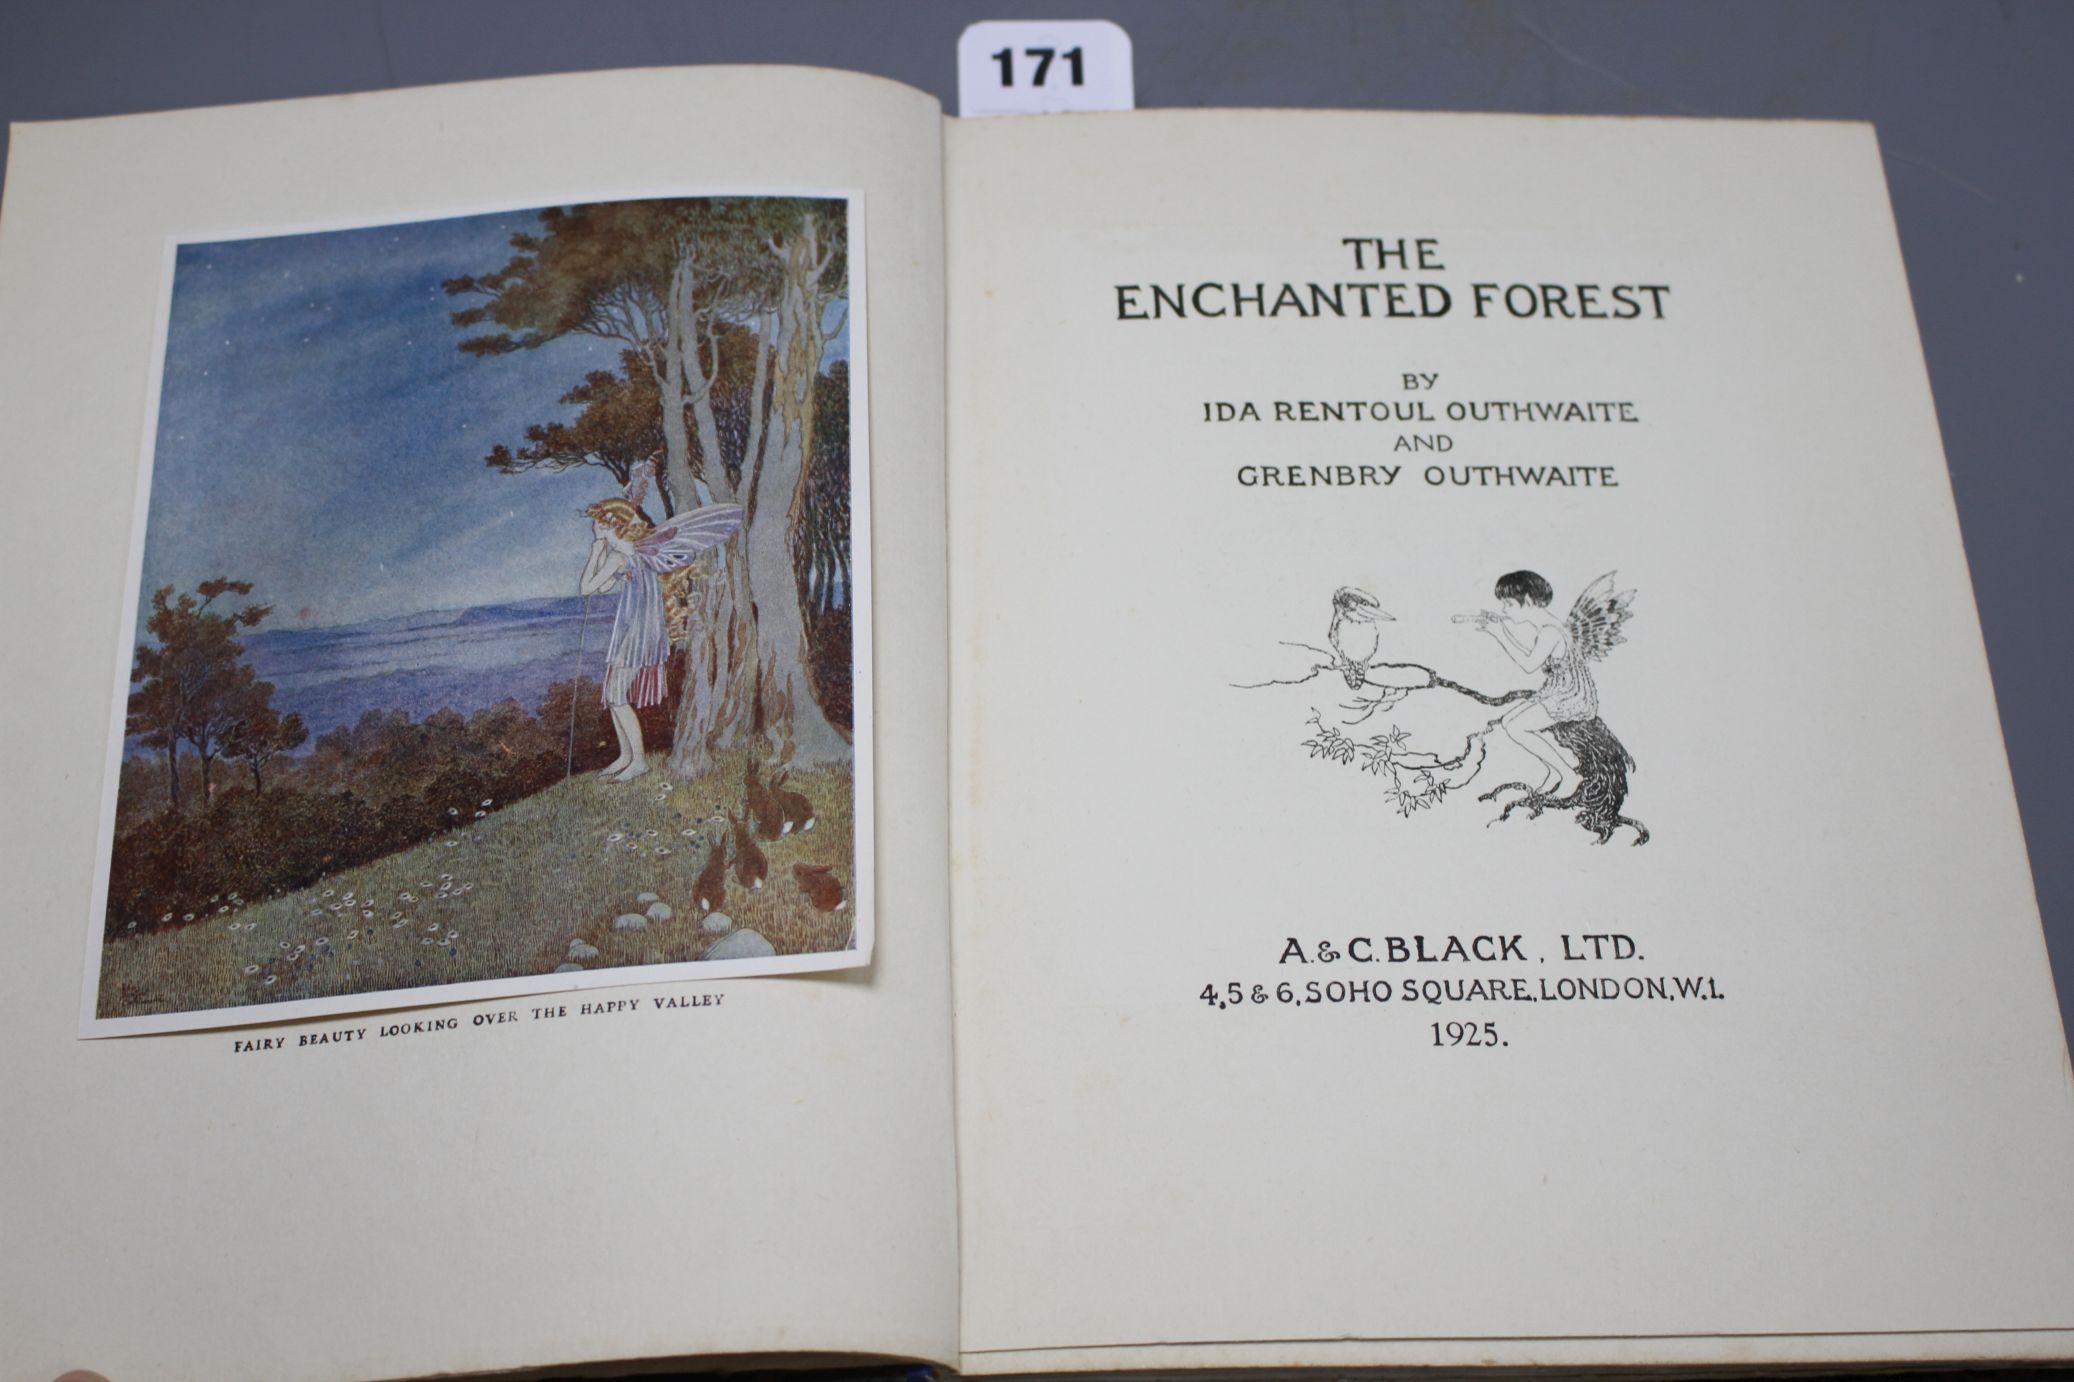 Outhwaite, Ida and Grenbry - The Enchanted Forest, A & C Black Ltd 1925 Condition: good condition - Image 2 of 8